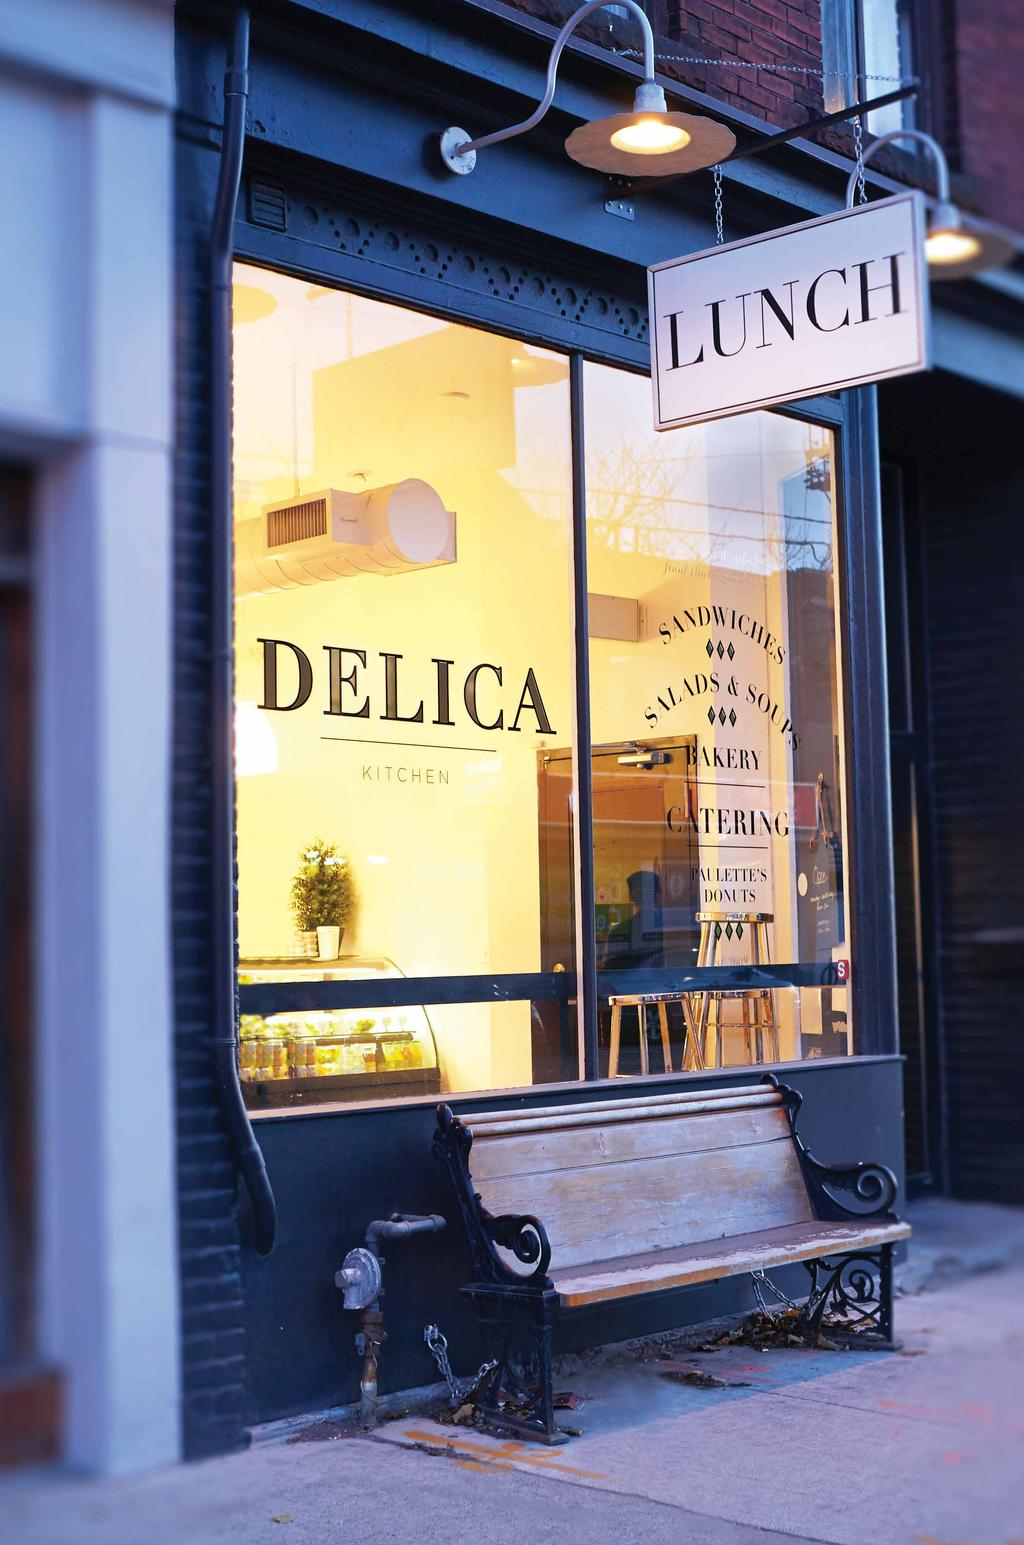 WHO WE ARE At Delica Kitchen, we re driven by our love and respect for authentic, all-natural fresh food.